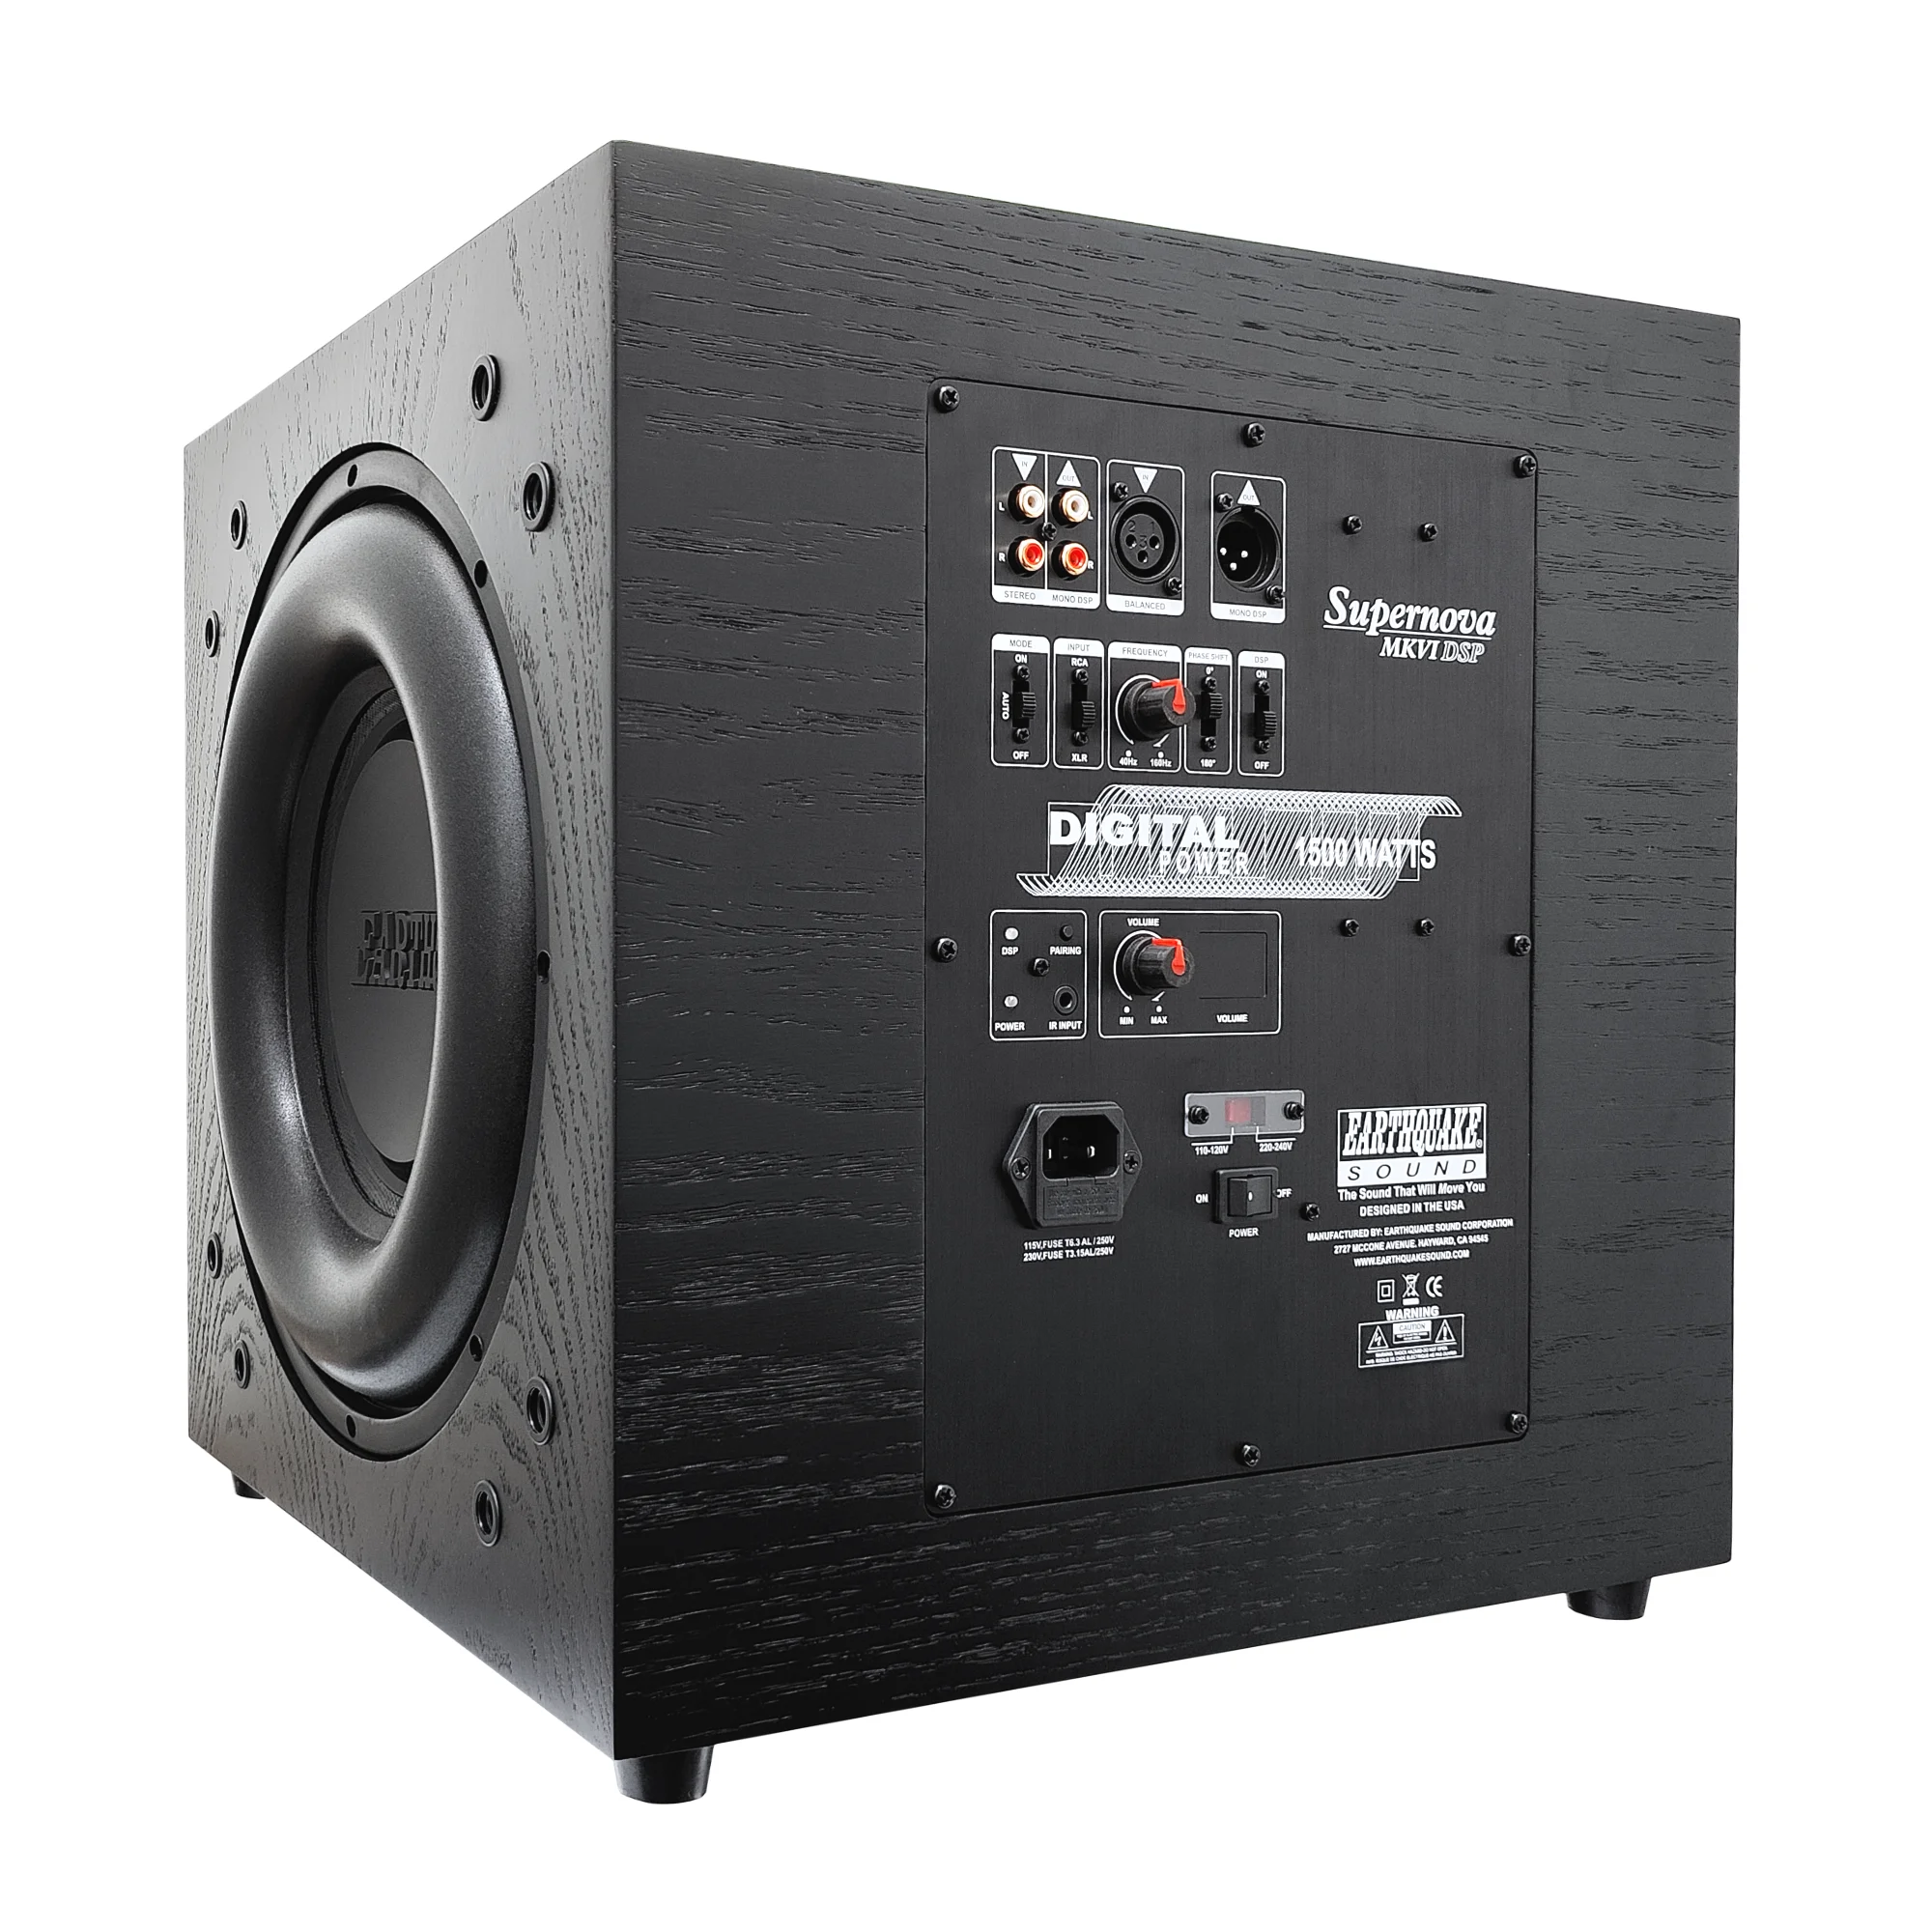 Earthquake Supernova MKVI DSP side view with the advanced Class D plate amplifier with built-in Digital Signal Processing (DSP).